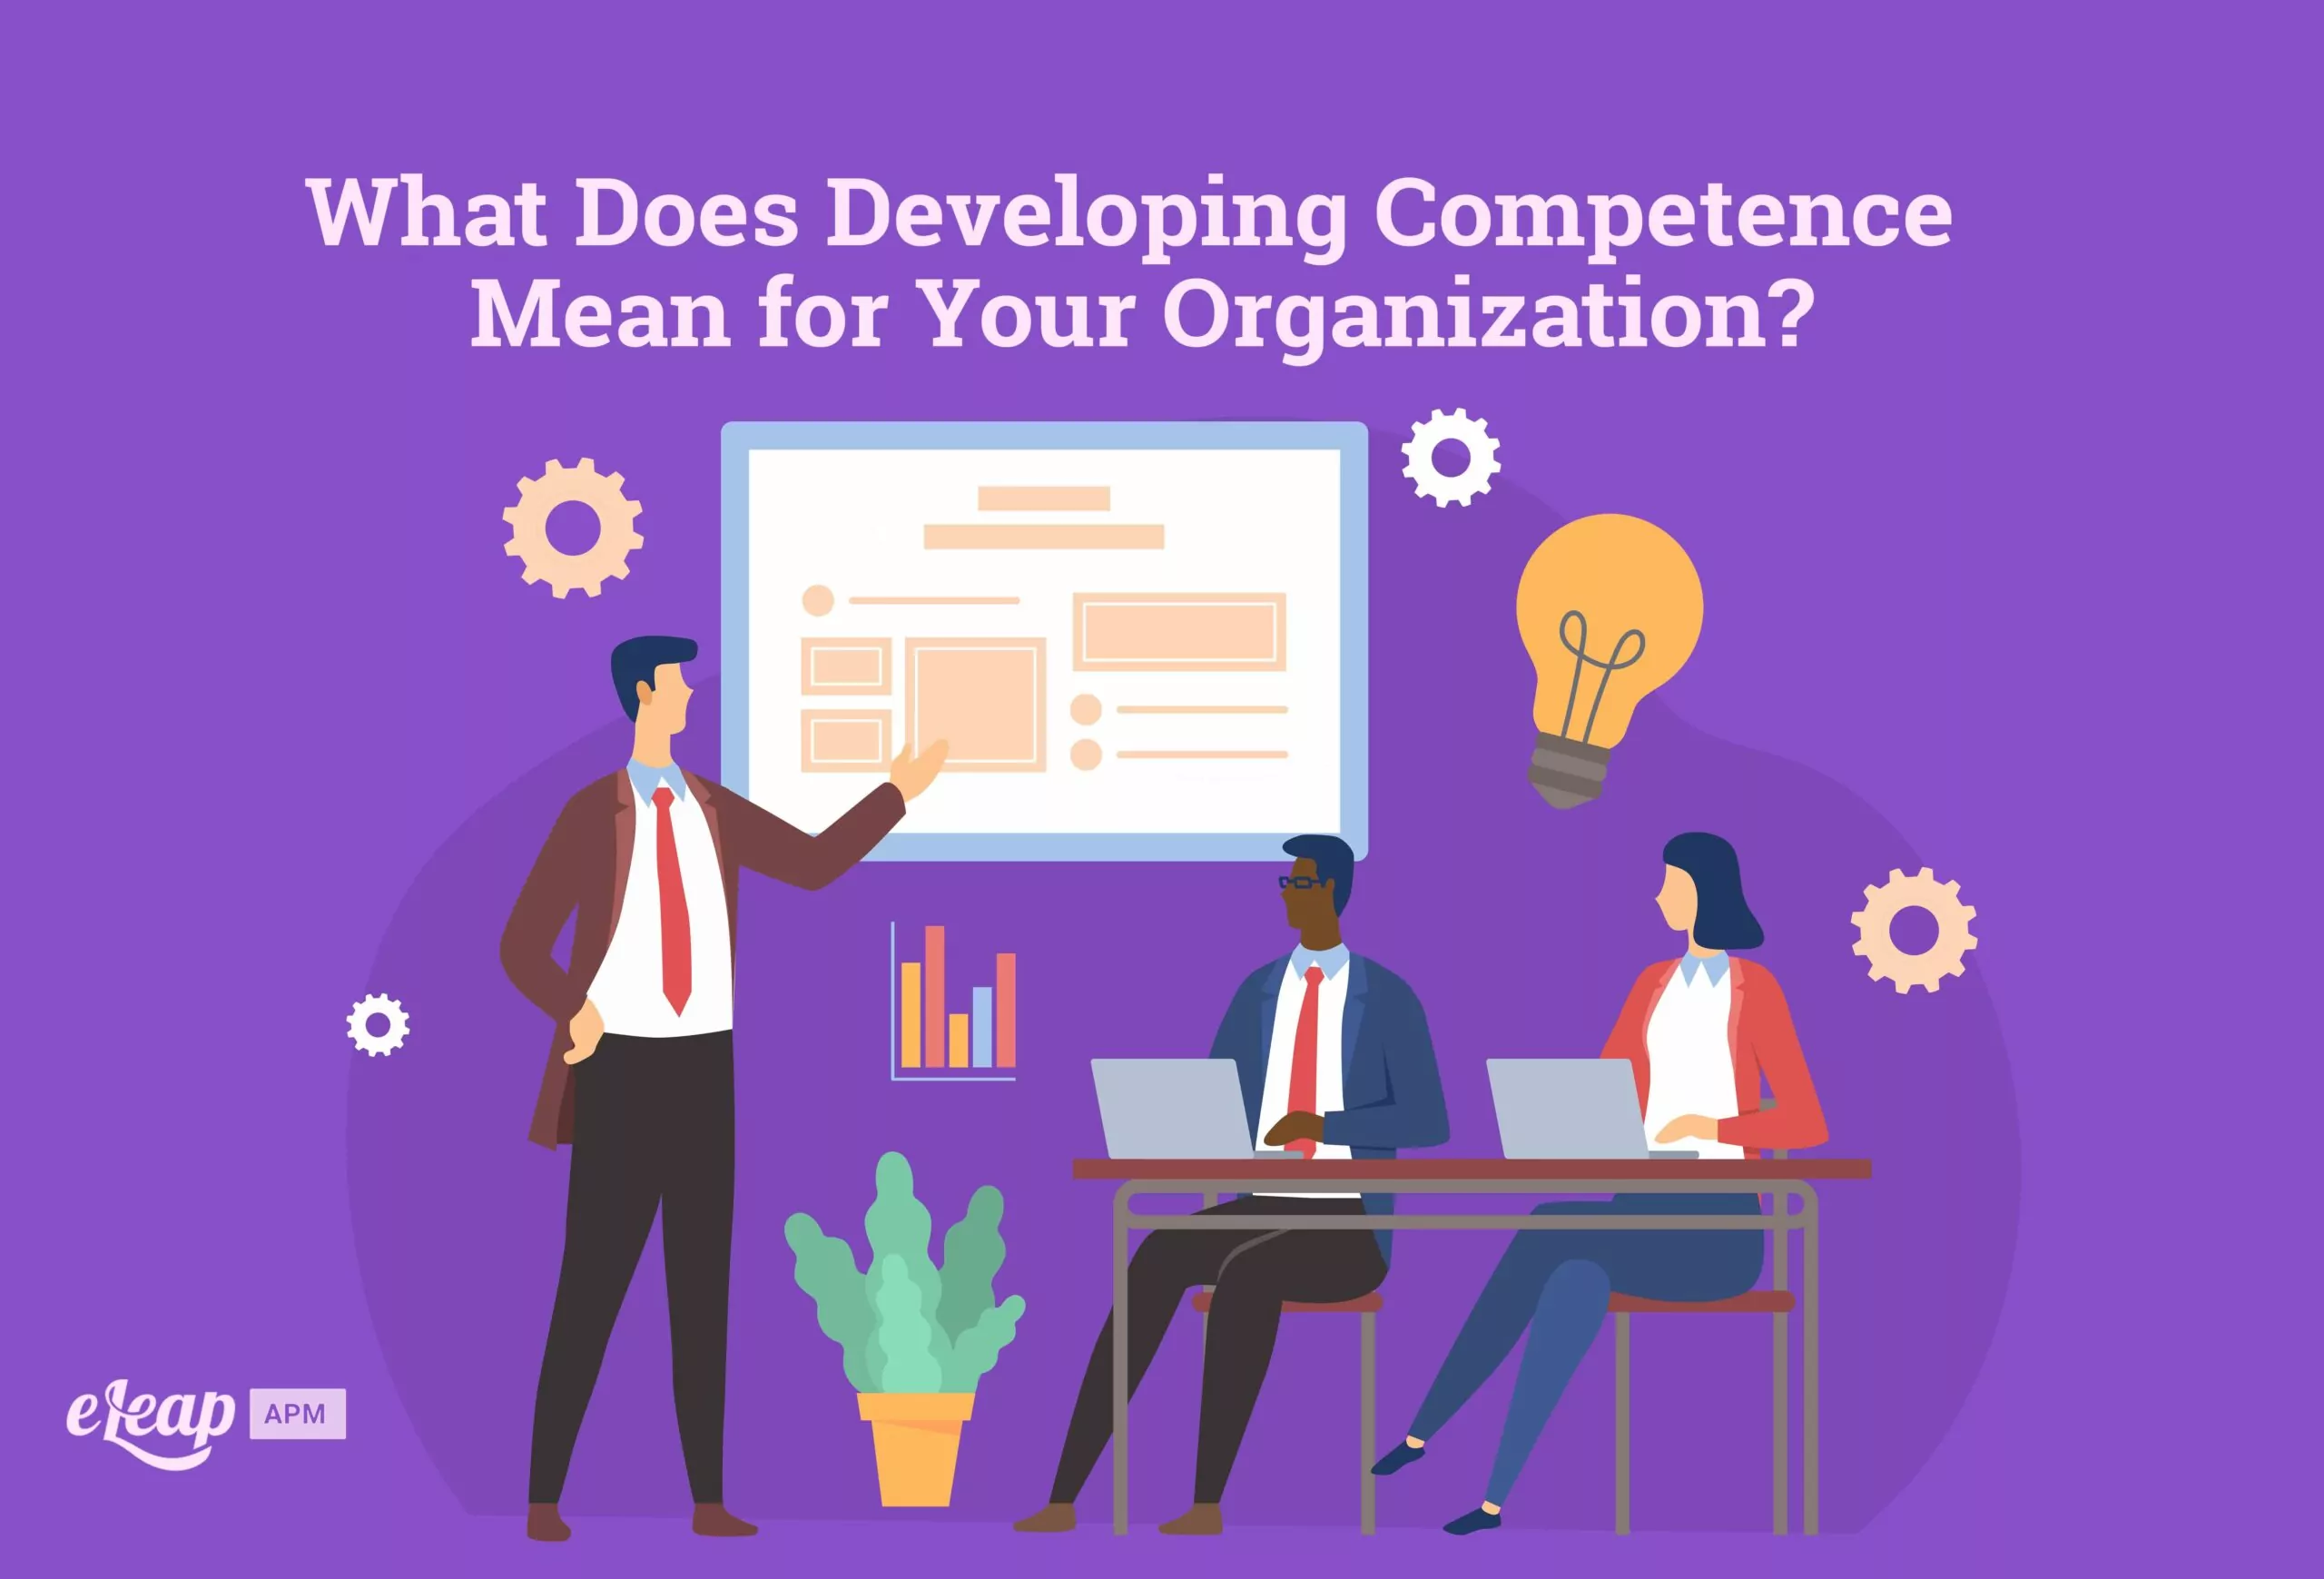 What Does Developing Competence Mean for Your Organization?